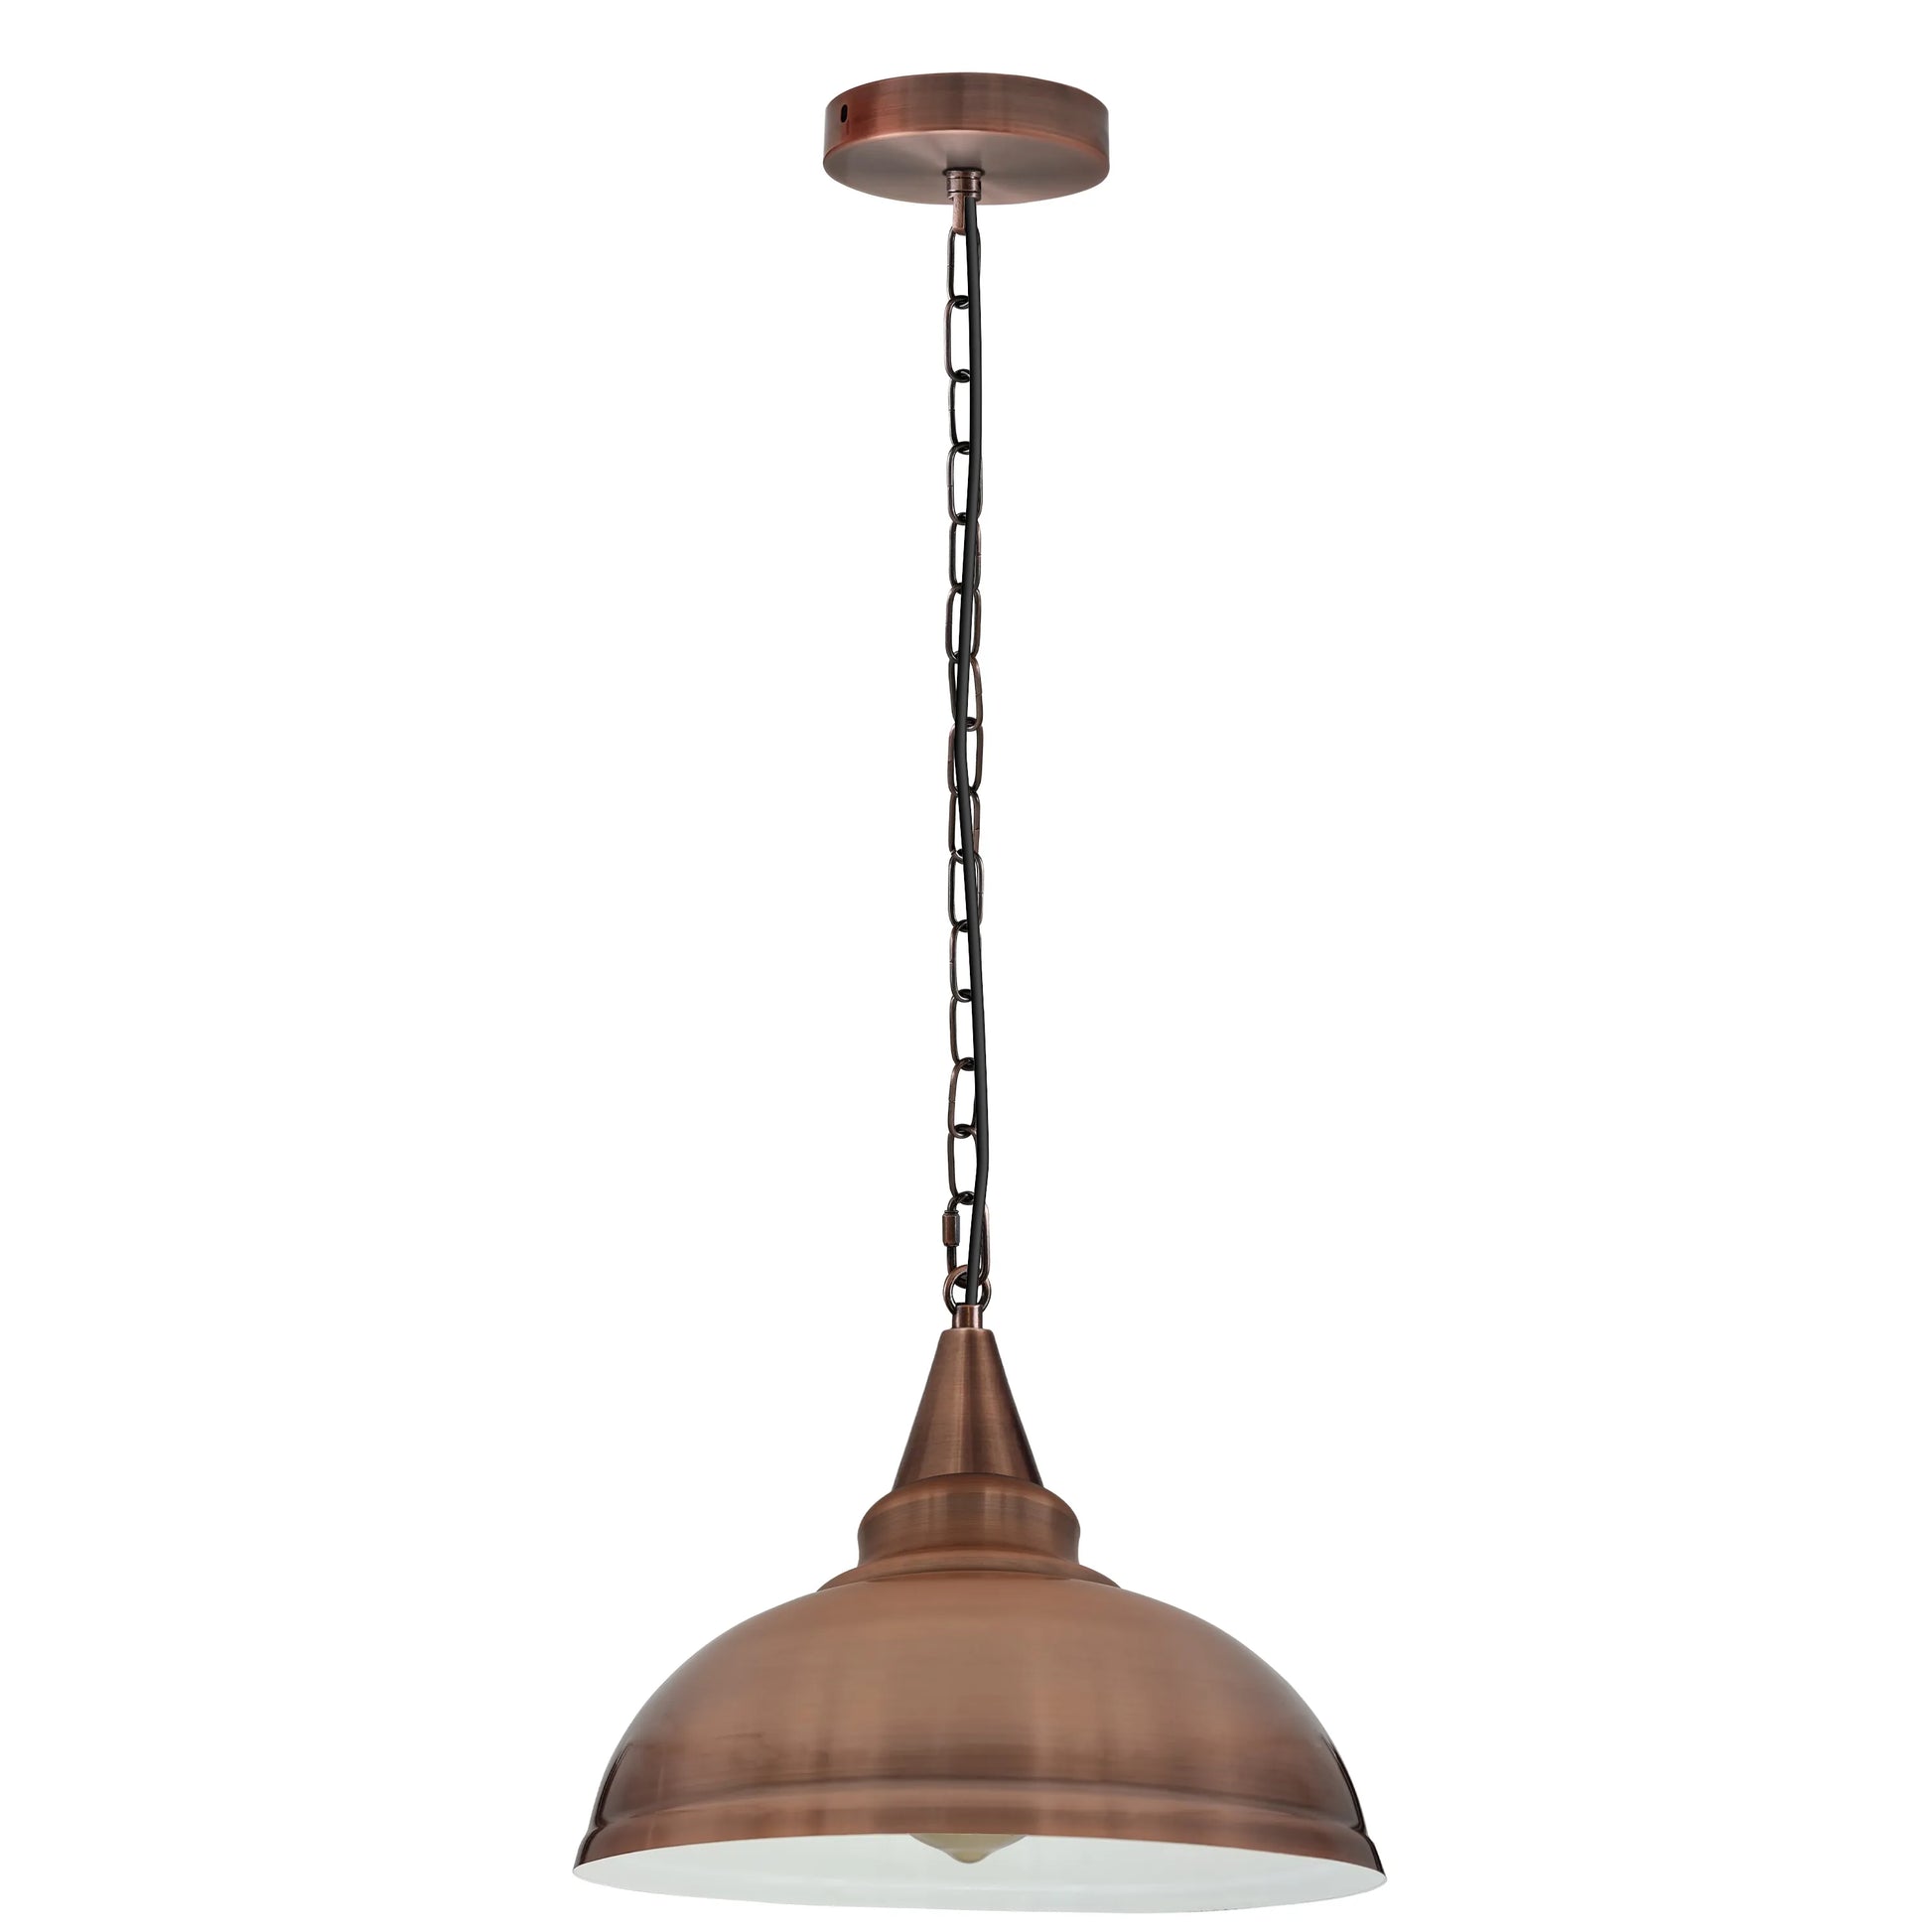 Copper E27 Ceiling Hanging Light Cage Shade Loft Style Metal Pendant Lamp~4345